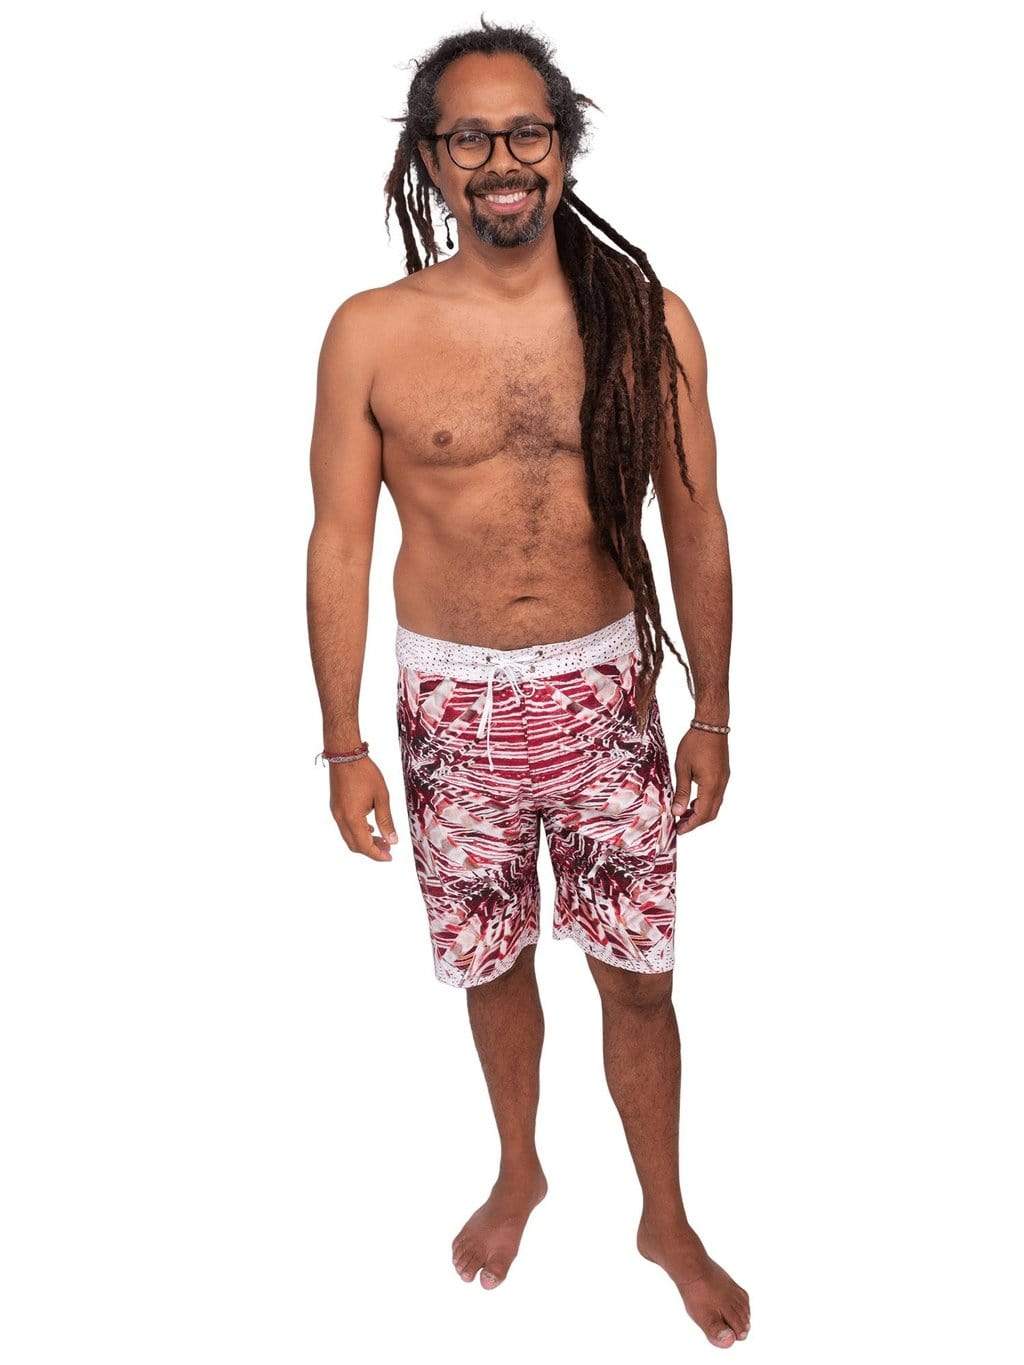 Model: Rolando is a seascape and fisheries ecologist. He is 5’9”, 190 lbs and is wearing a 33.